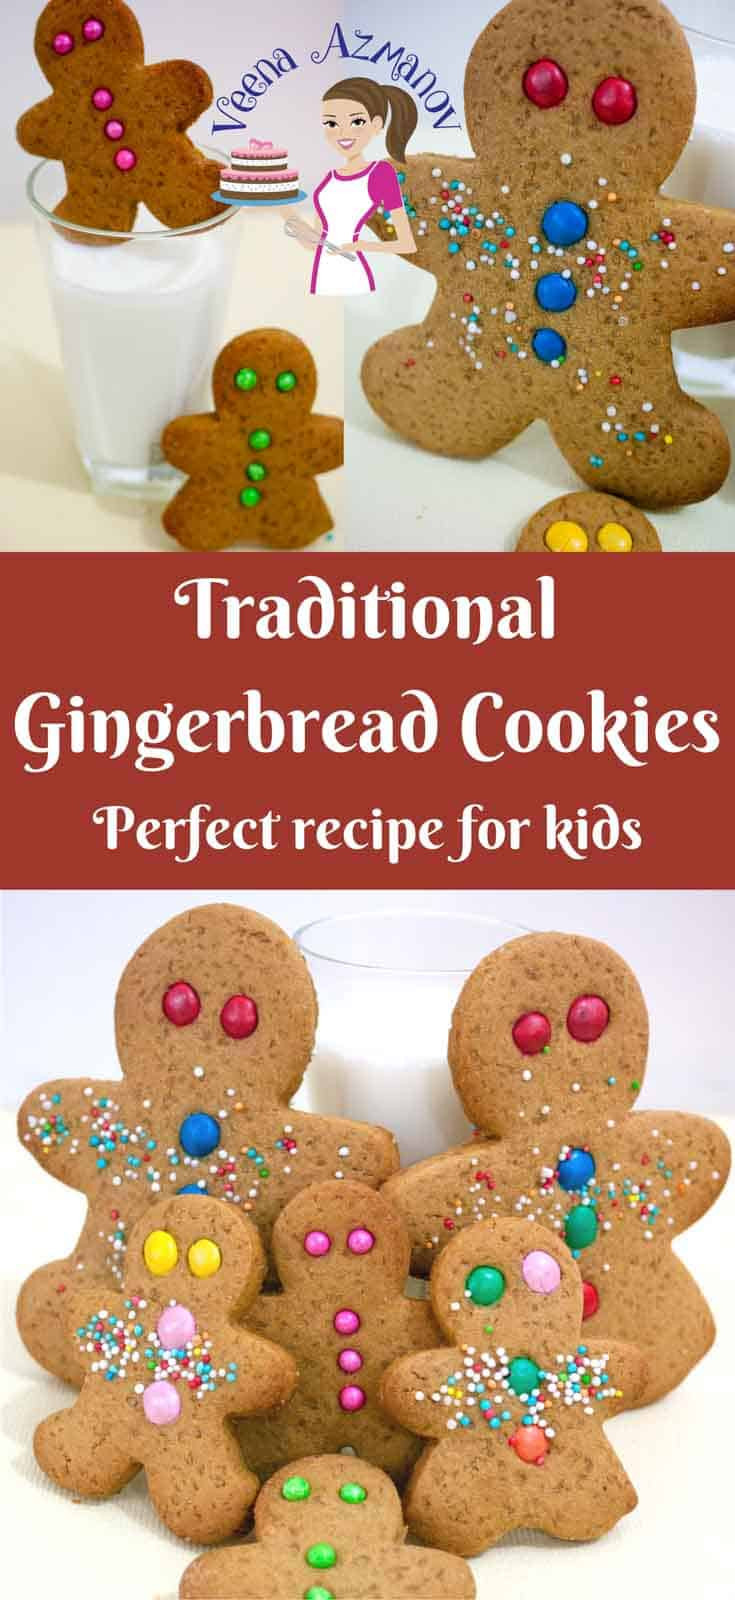 Gingerbread Cookies Recipe for Kids Lovely Traditional Gingerbread Cookies Recipe for Kids Veena